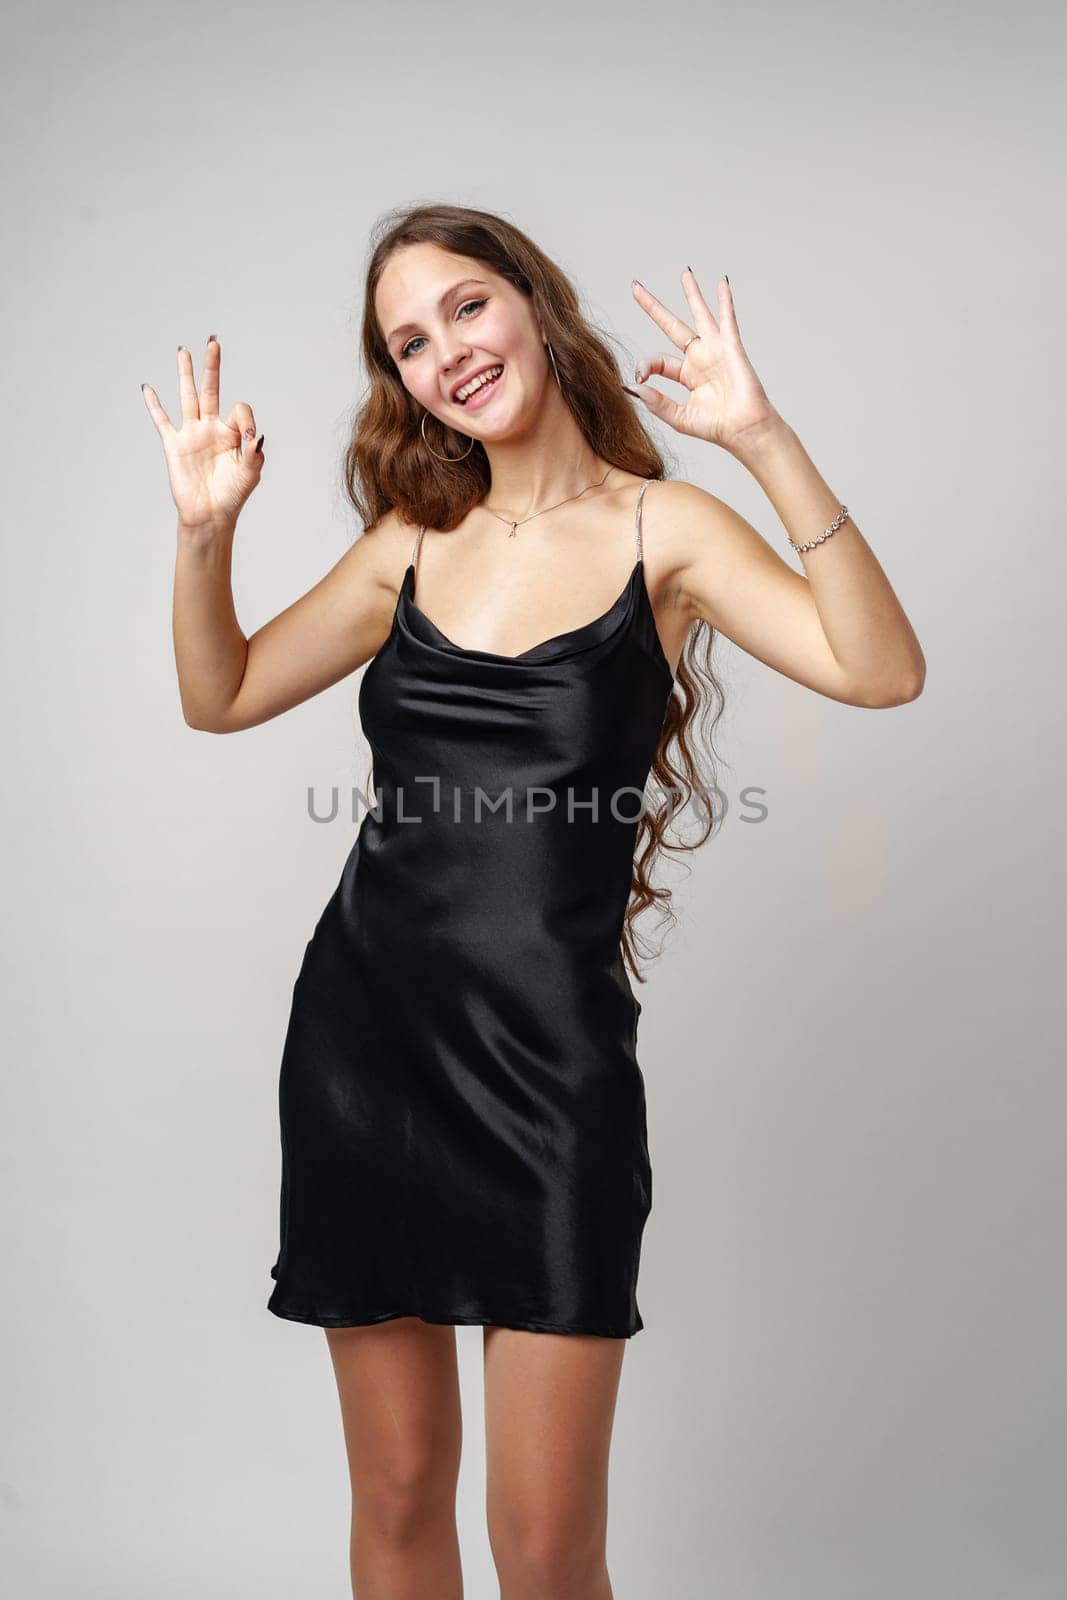 A cheerful young woman with long brown hair is seen giving an okay gesture with both hands, wearing a sleek black dress that suggests a formal or festive occasion. Her joyous expression and the simplicity of the background draw attention to her gesture and attire.